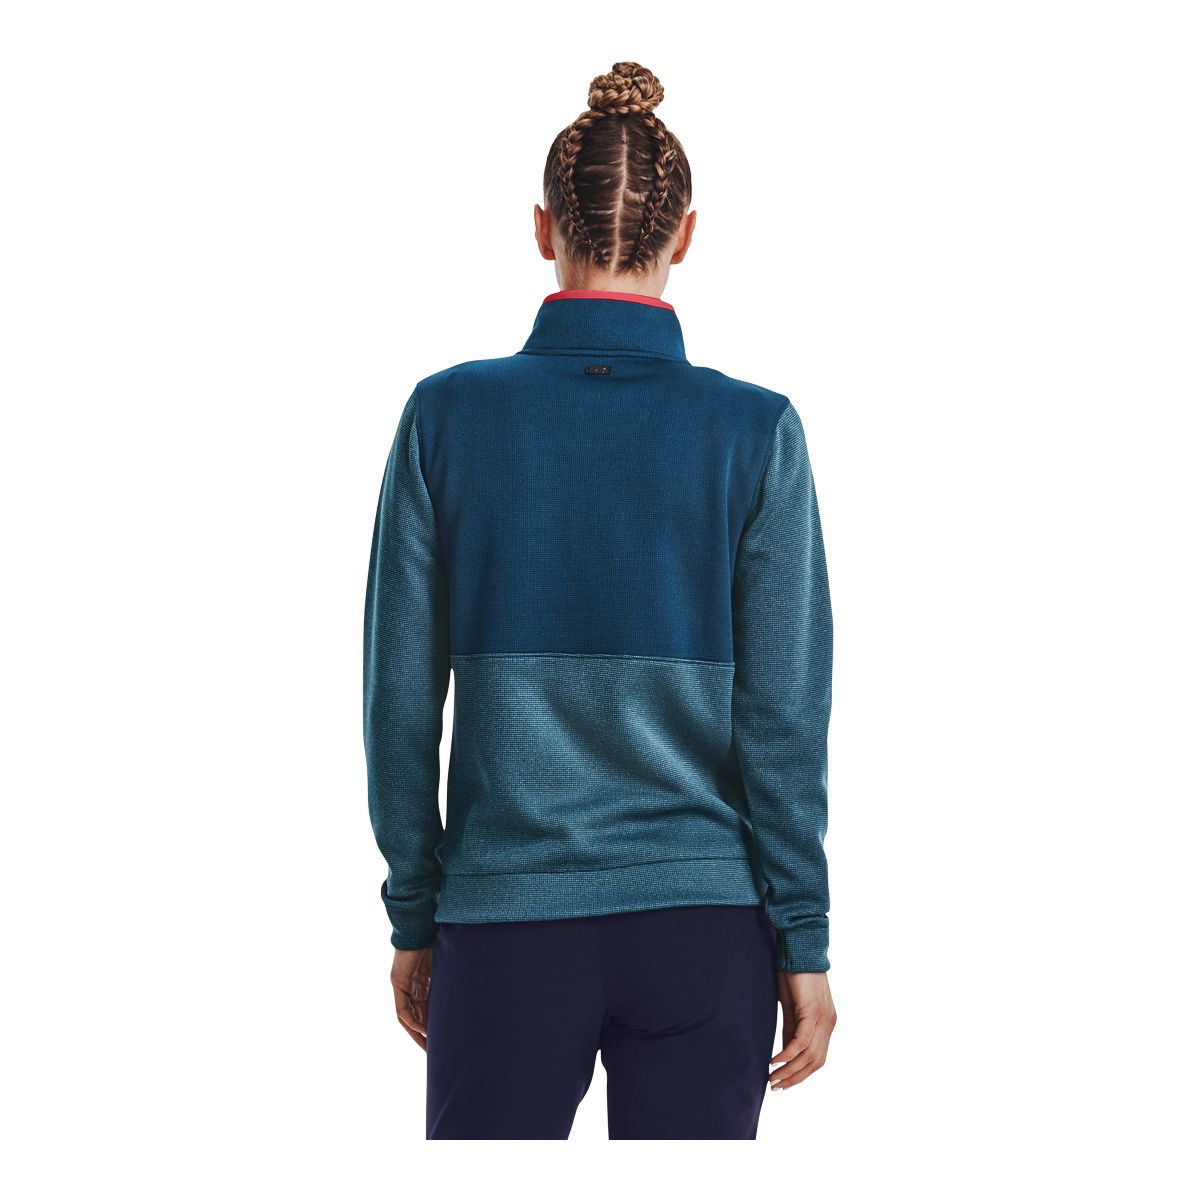 https://media-www.sportchek.ca/product/div-03-softgoods/dpt-70-athletic-clothing/sdpt-02-womens/333822589/ua-golf-wmns-storm-sweater-fleece-hz-green-13429063-934c-4697-9135-161fbaec9907-jpgrendition.jpg?imdensity=1&imwidth=1244&impolicy=mZoom